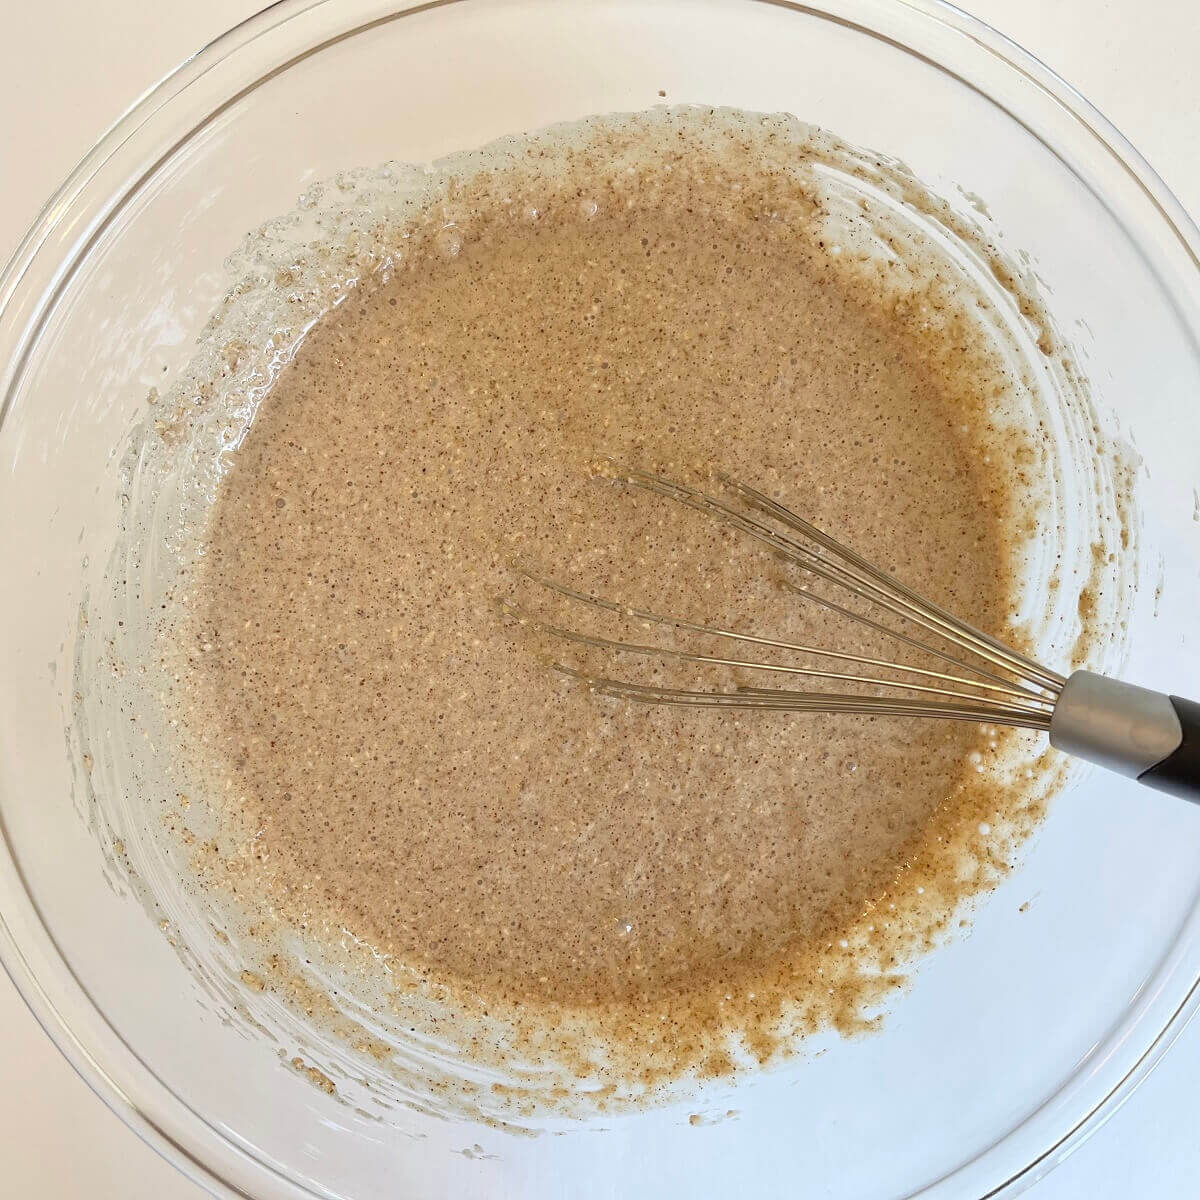 Oat flour batter in a large glass mixing bowl.